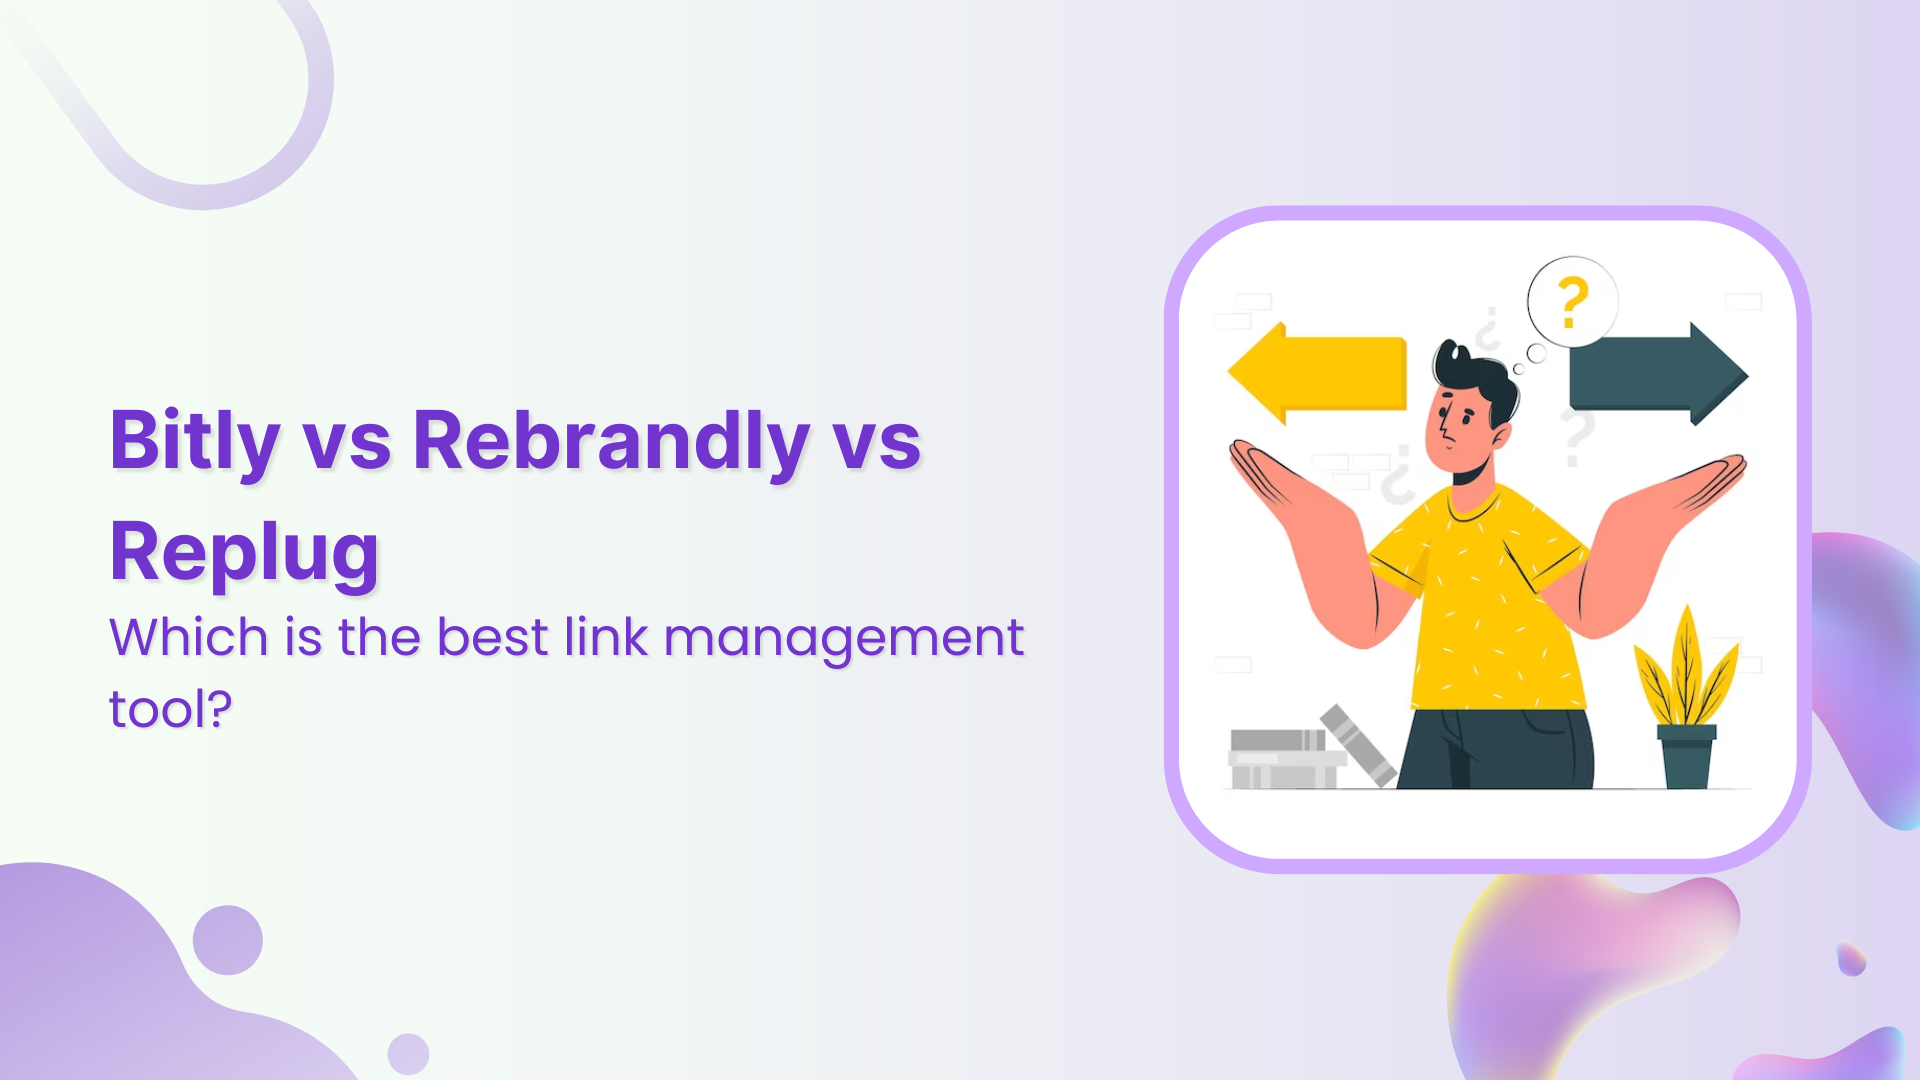 Bitly vs Rebrandly vs Replug: Which is the best link management tool?